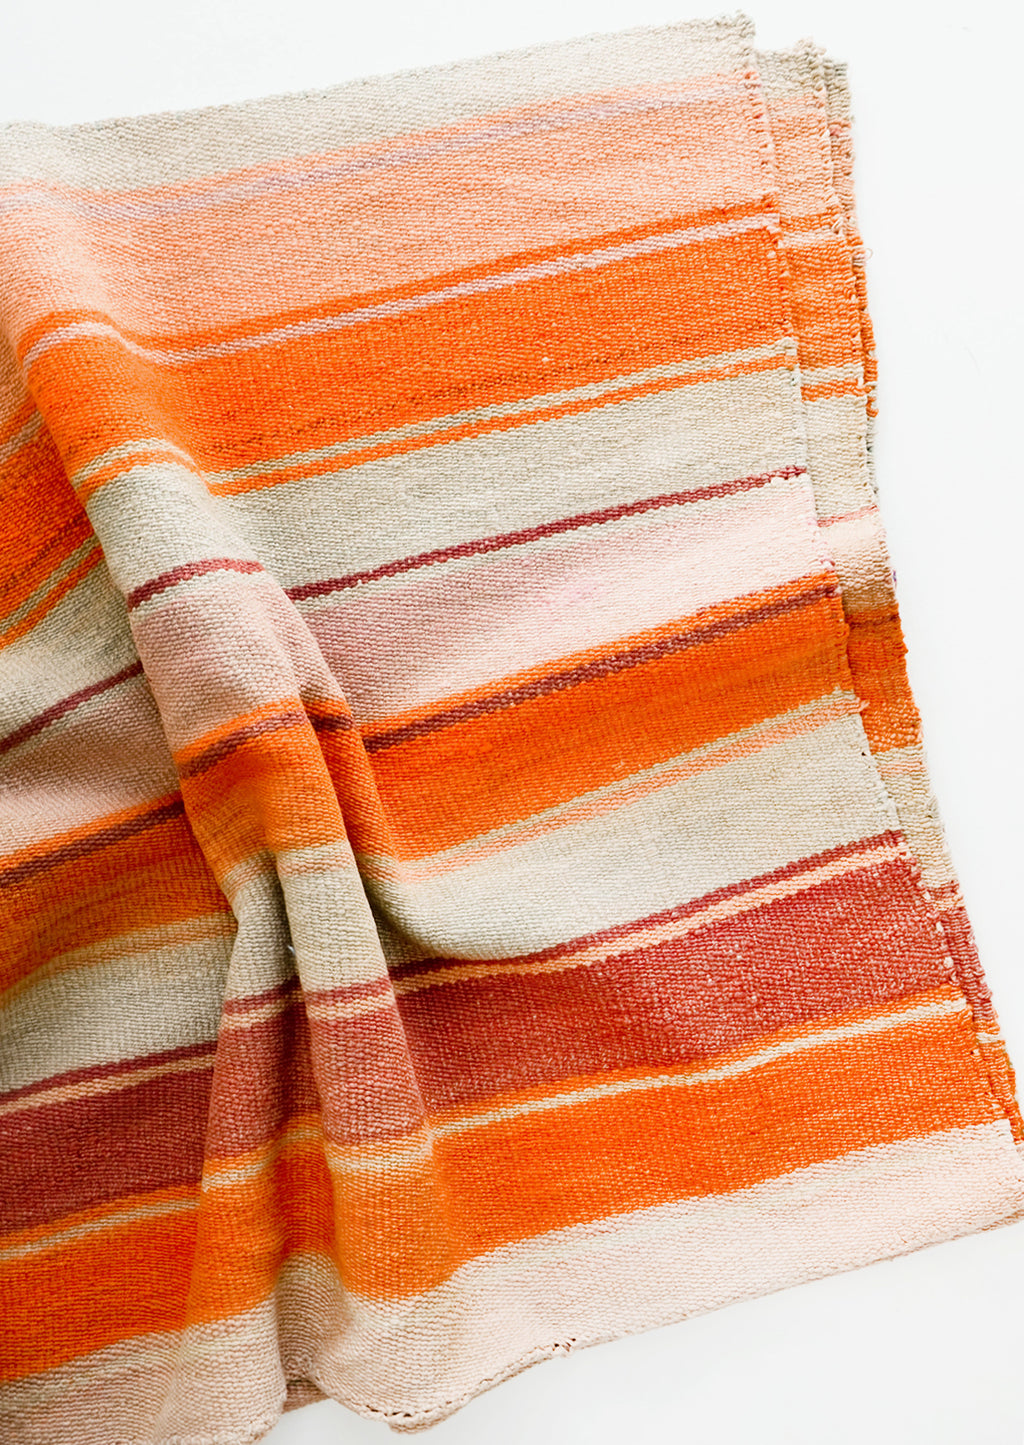 1: Woven textile intended for use as a rug or blanket, variegated colorful striped pattern.